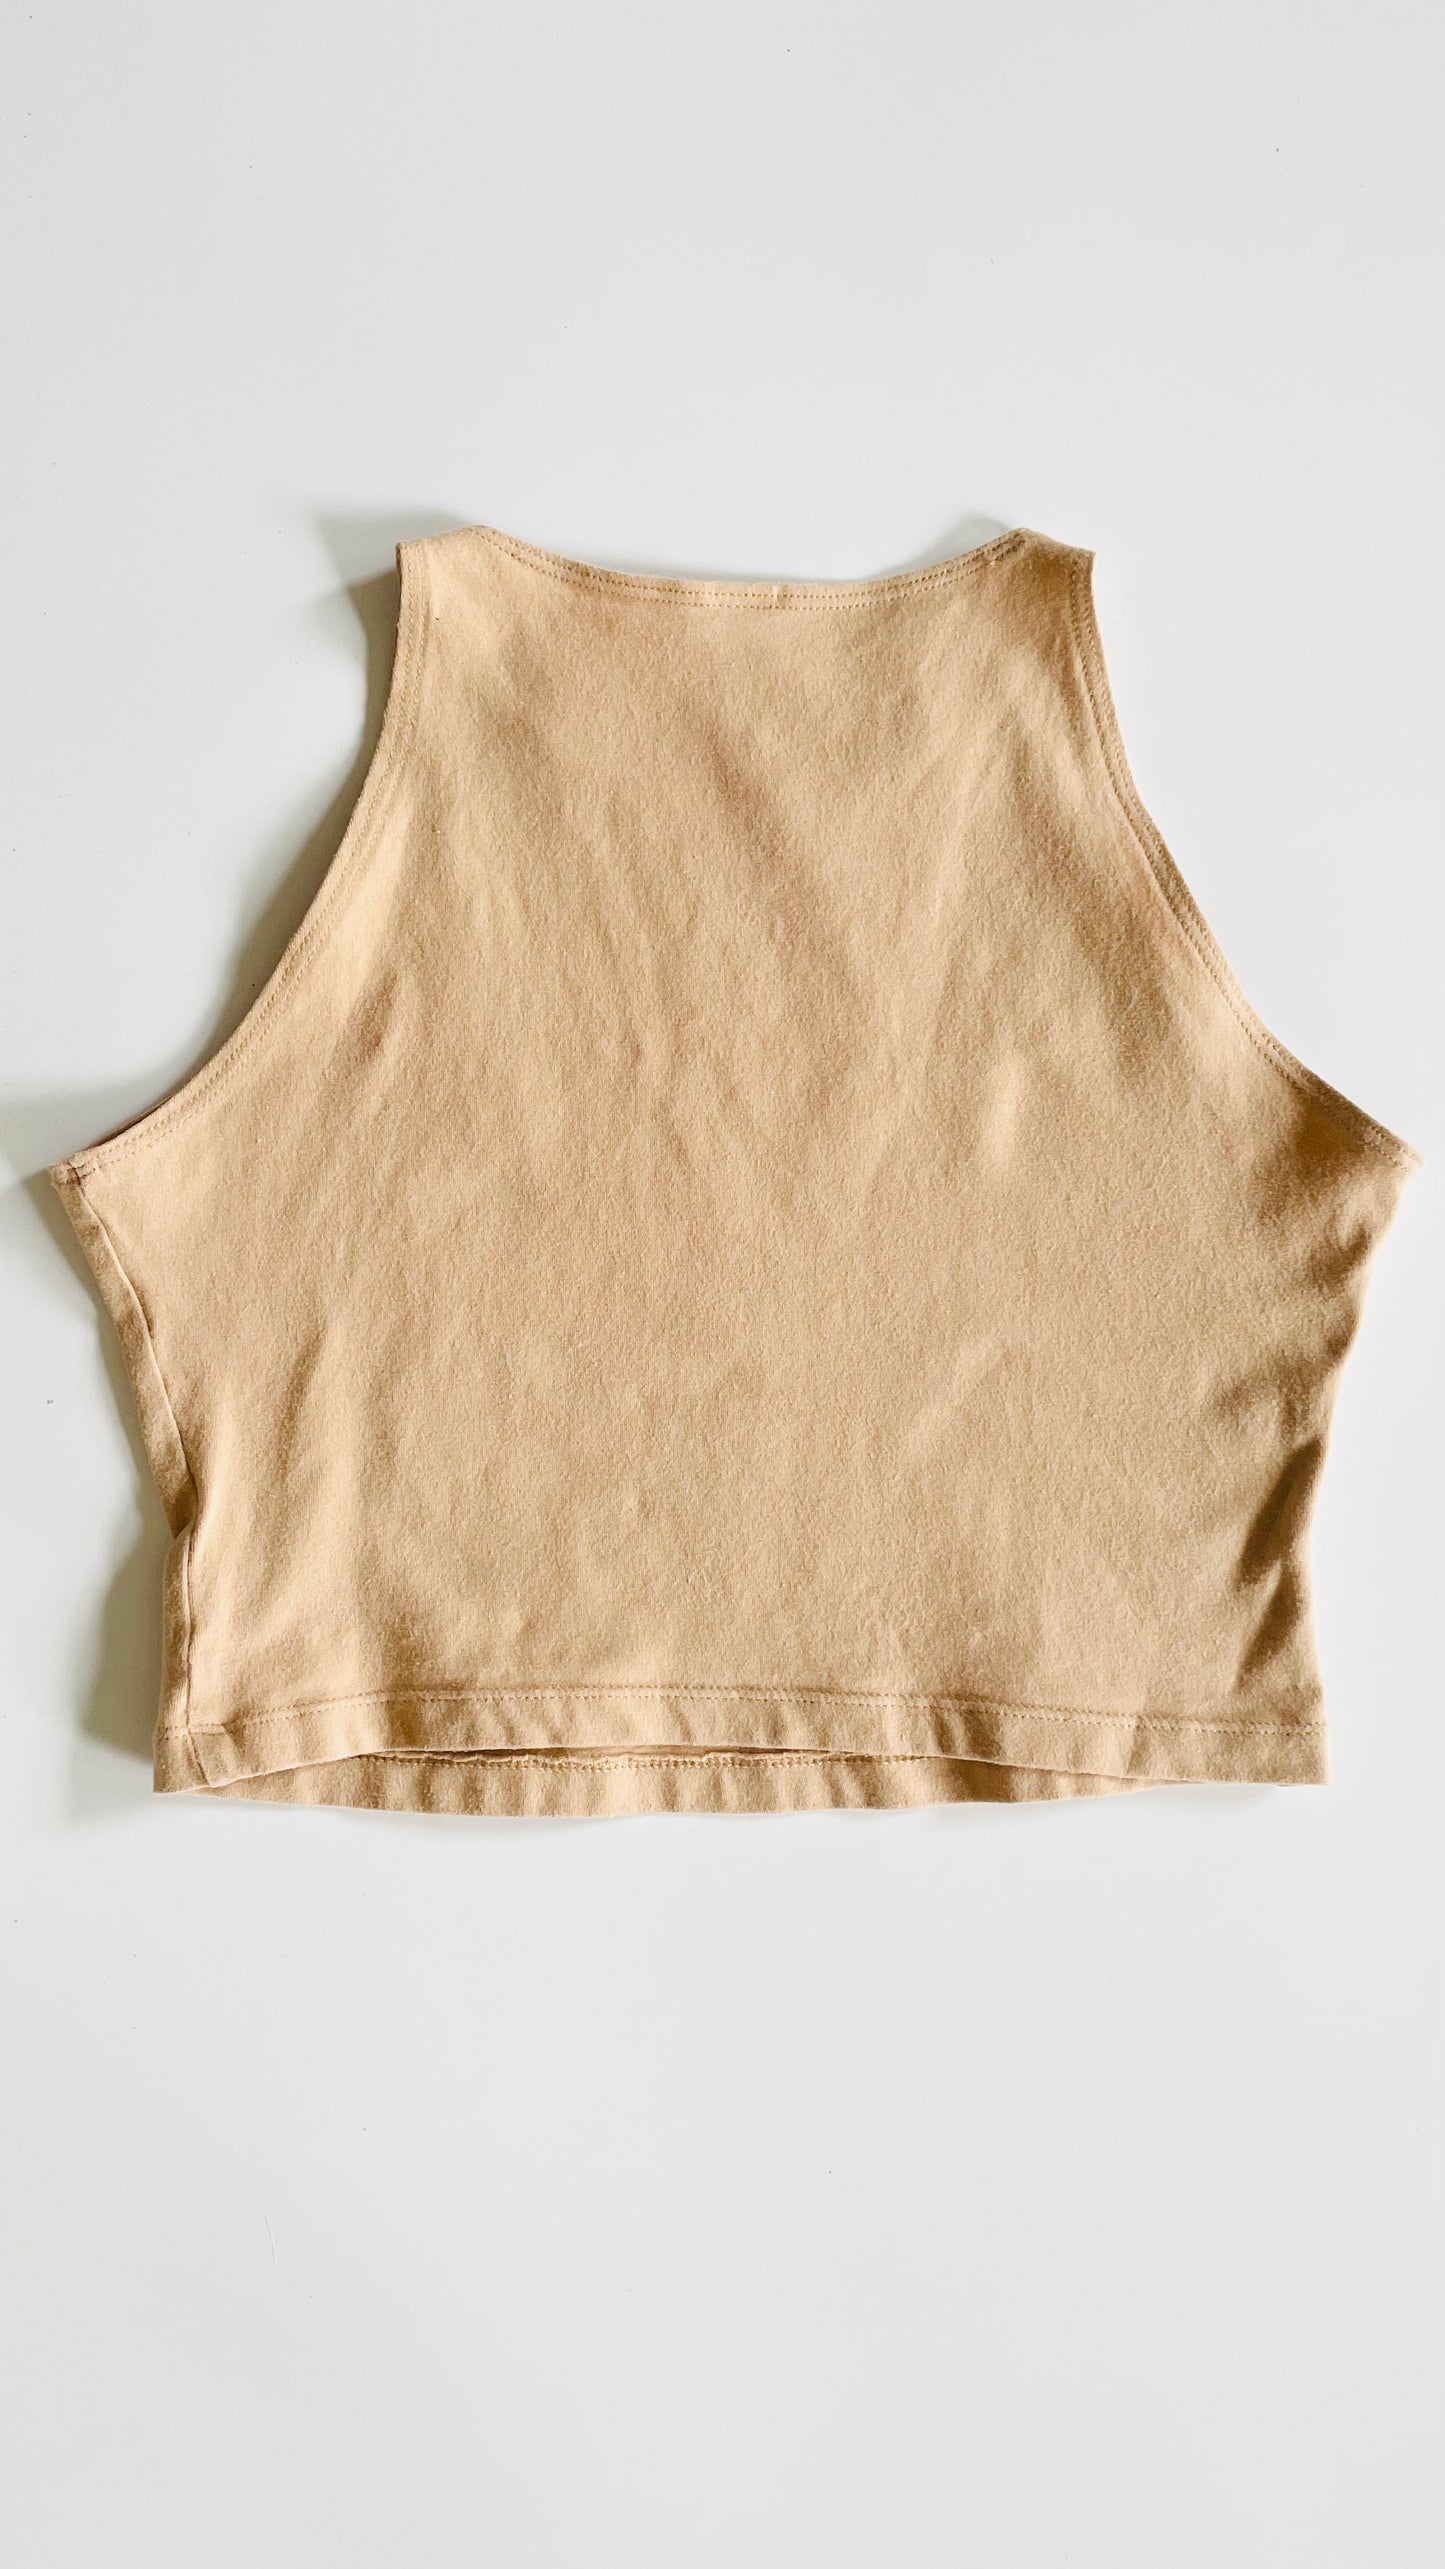 Pre-Loved American Apparel nude knit crop top - Size M